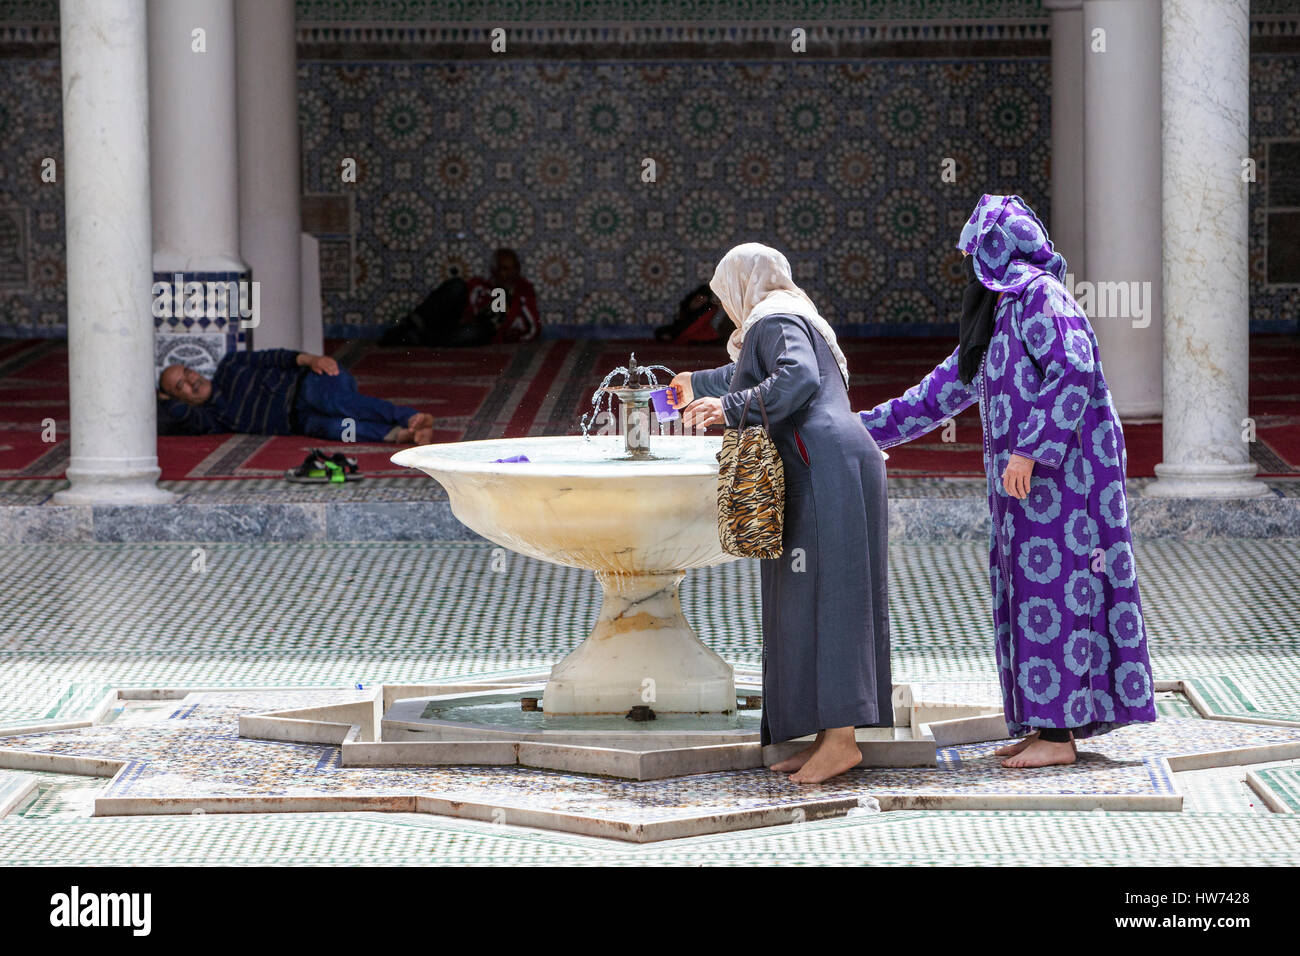 Fes, Morocco.  Women Getting Water for Ablutions, Mausoleum of Moulay Idris II, Fes El-Bali. Stock Photo